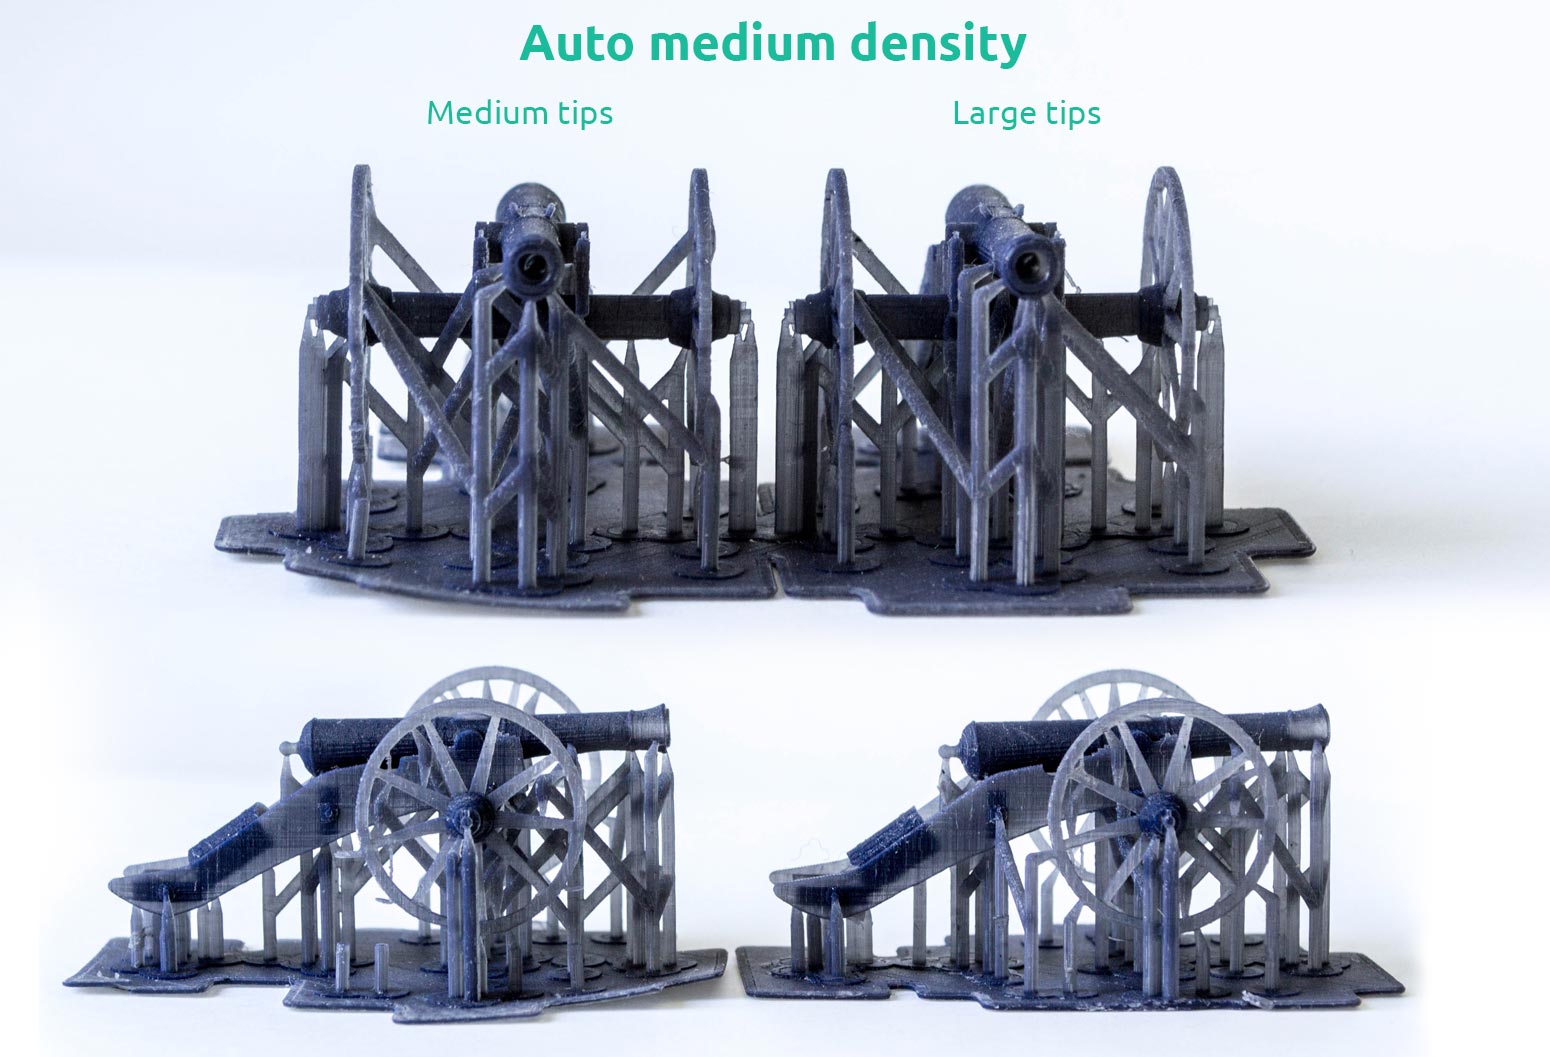 AmeraLabs key principles of 3D printing supports that work experiment moai 3D printed cannons medium